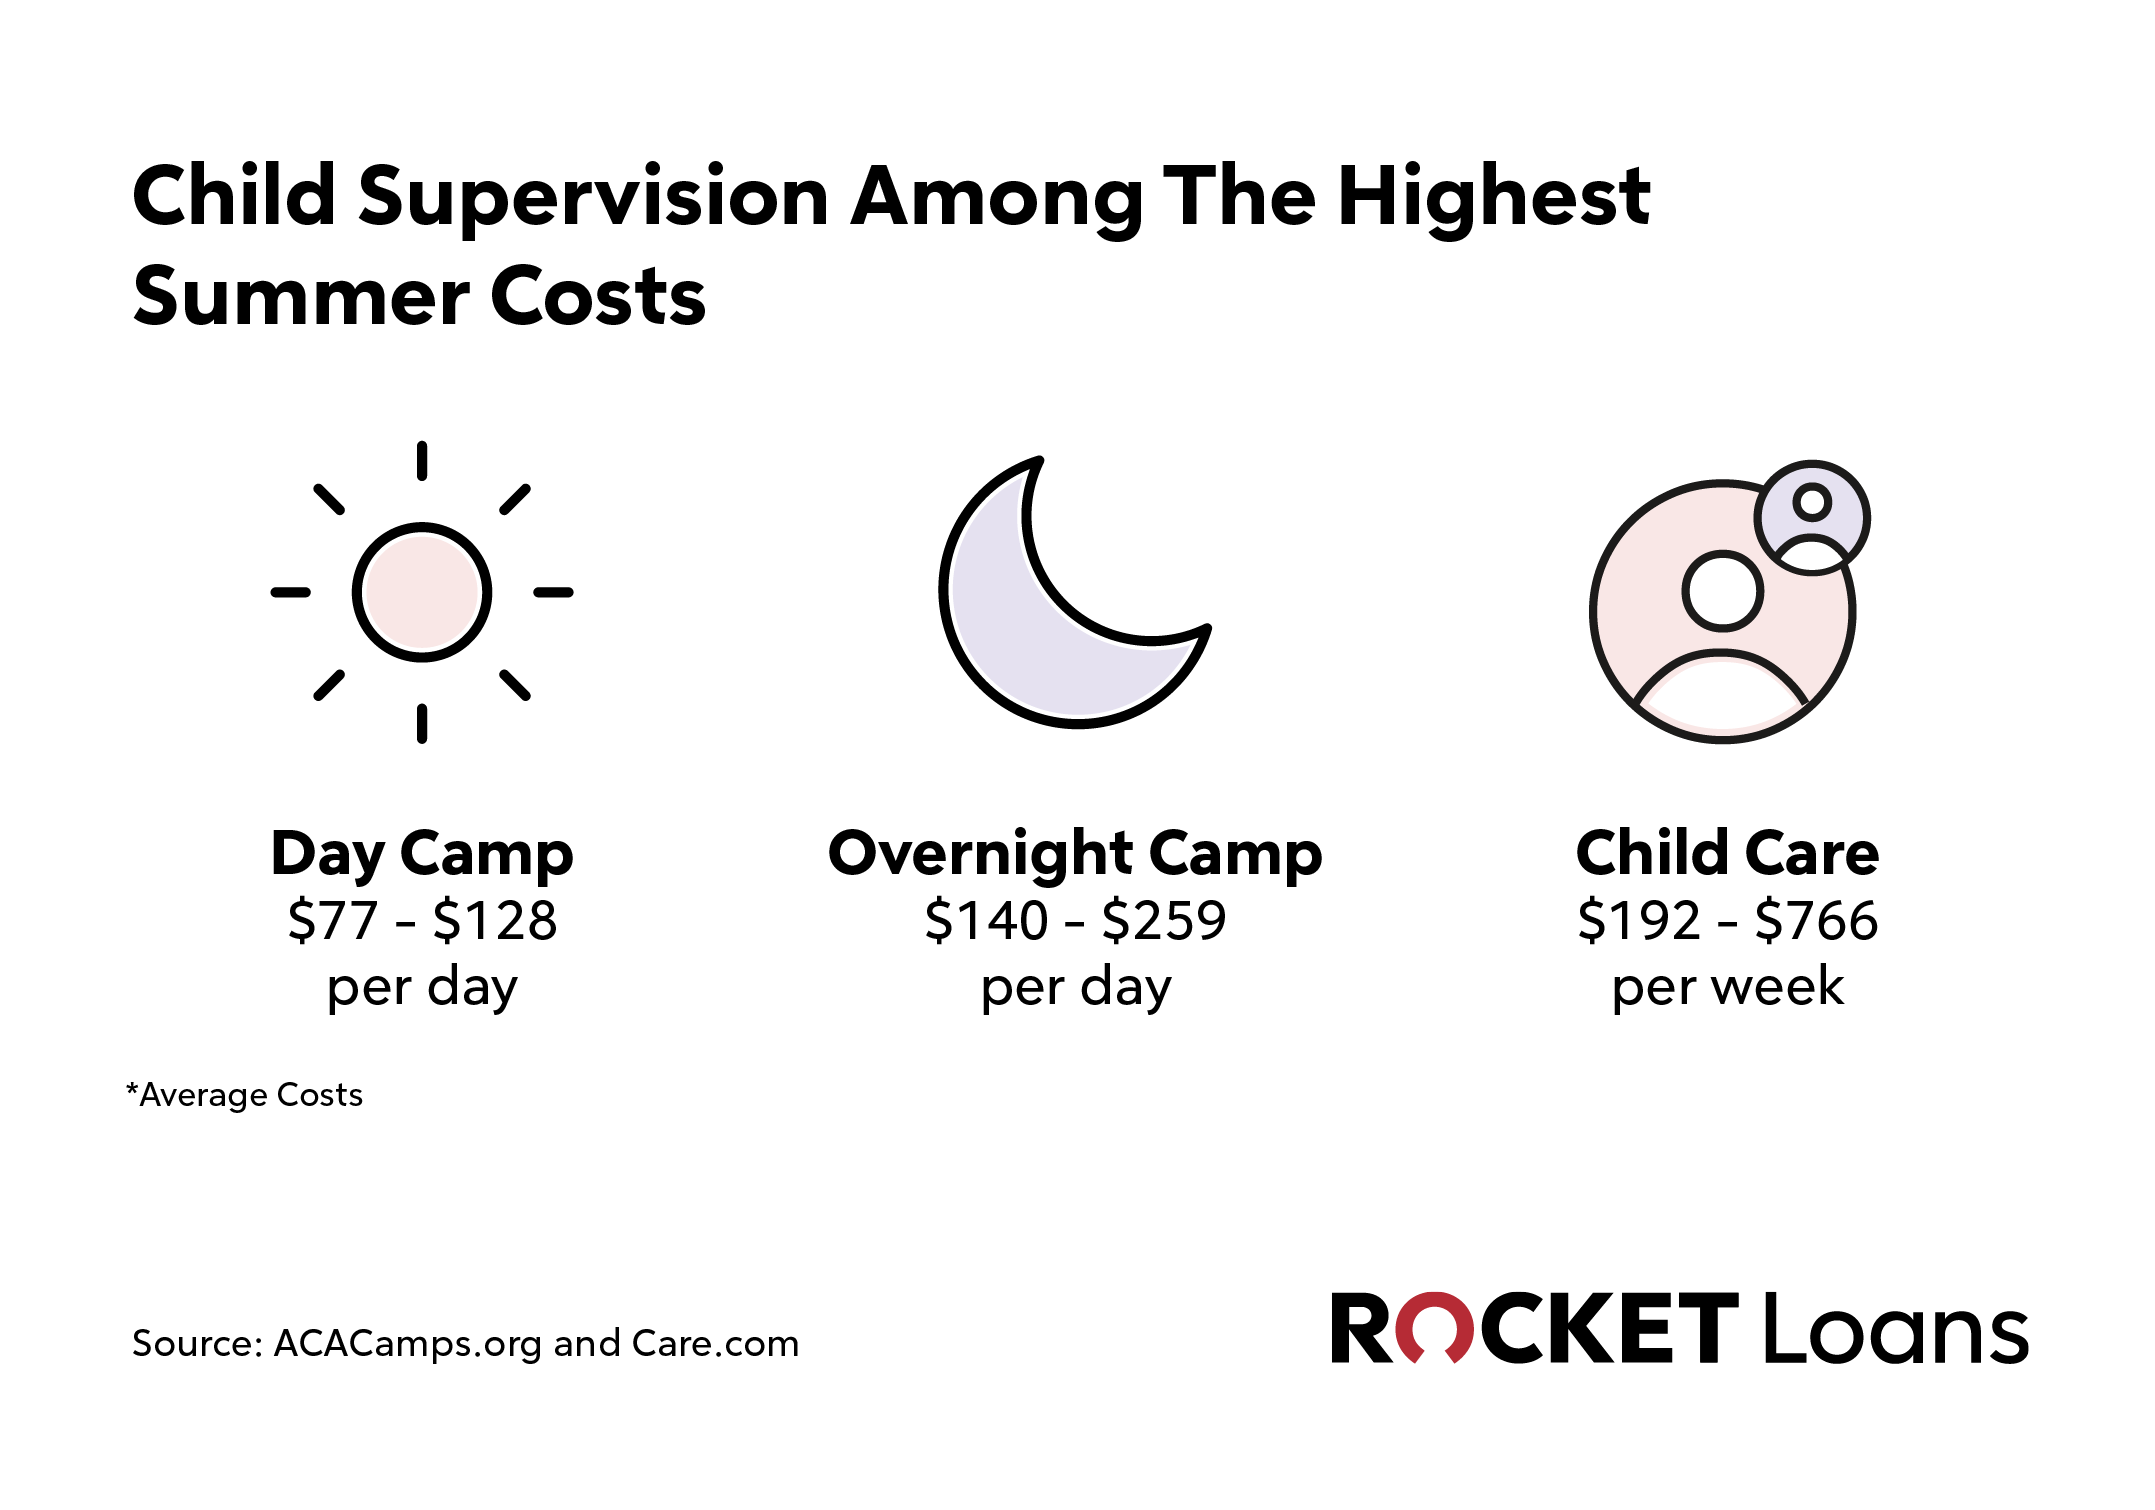 How much will your summer plans cost you?